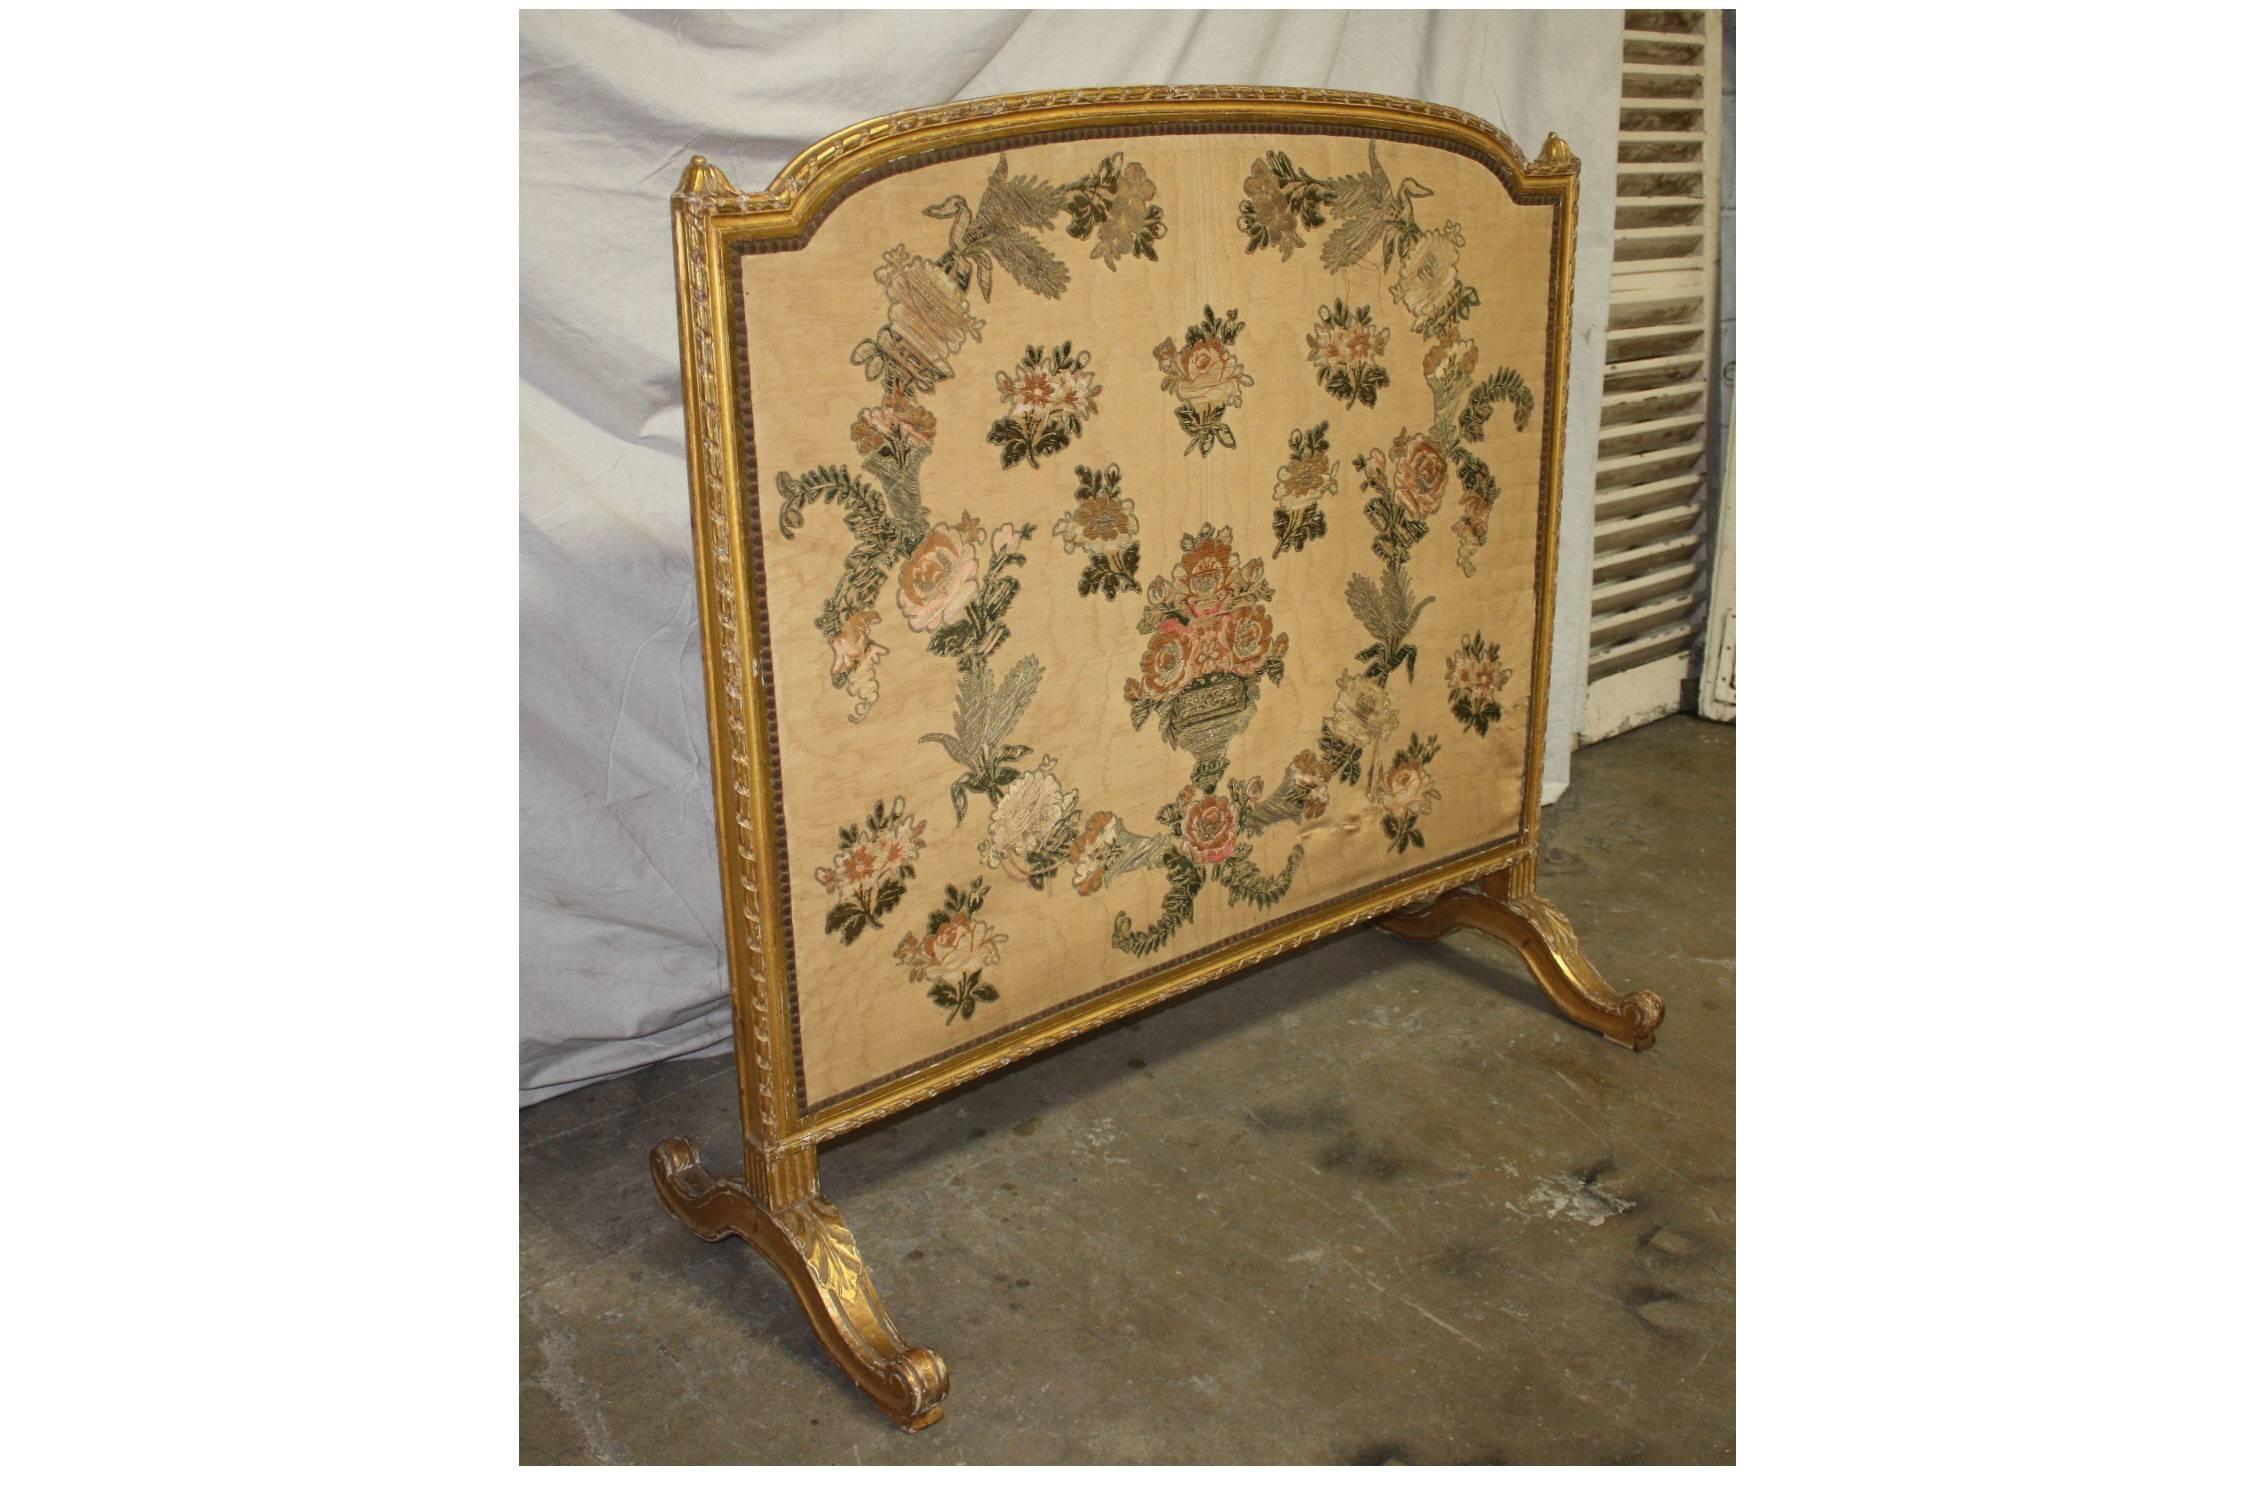 19th century French giltwood screen.